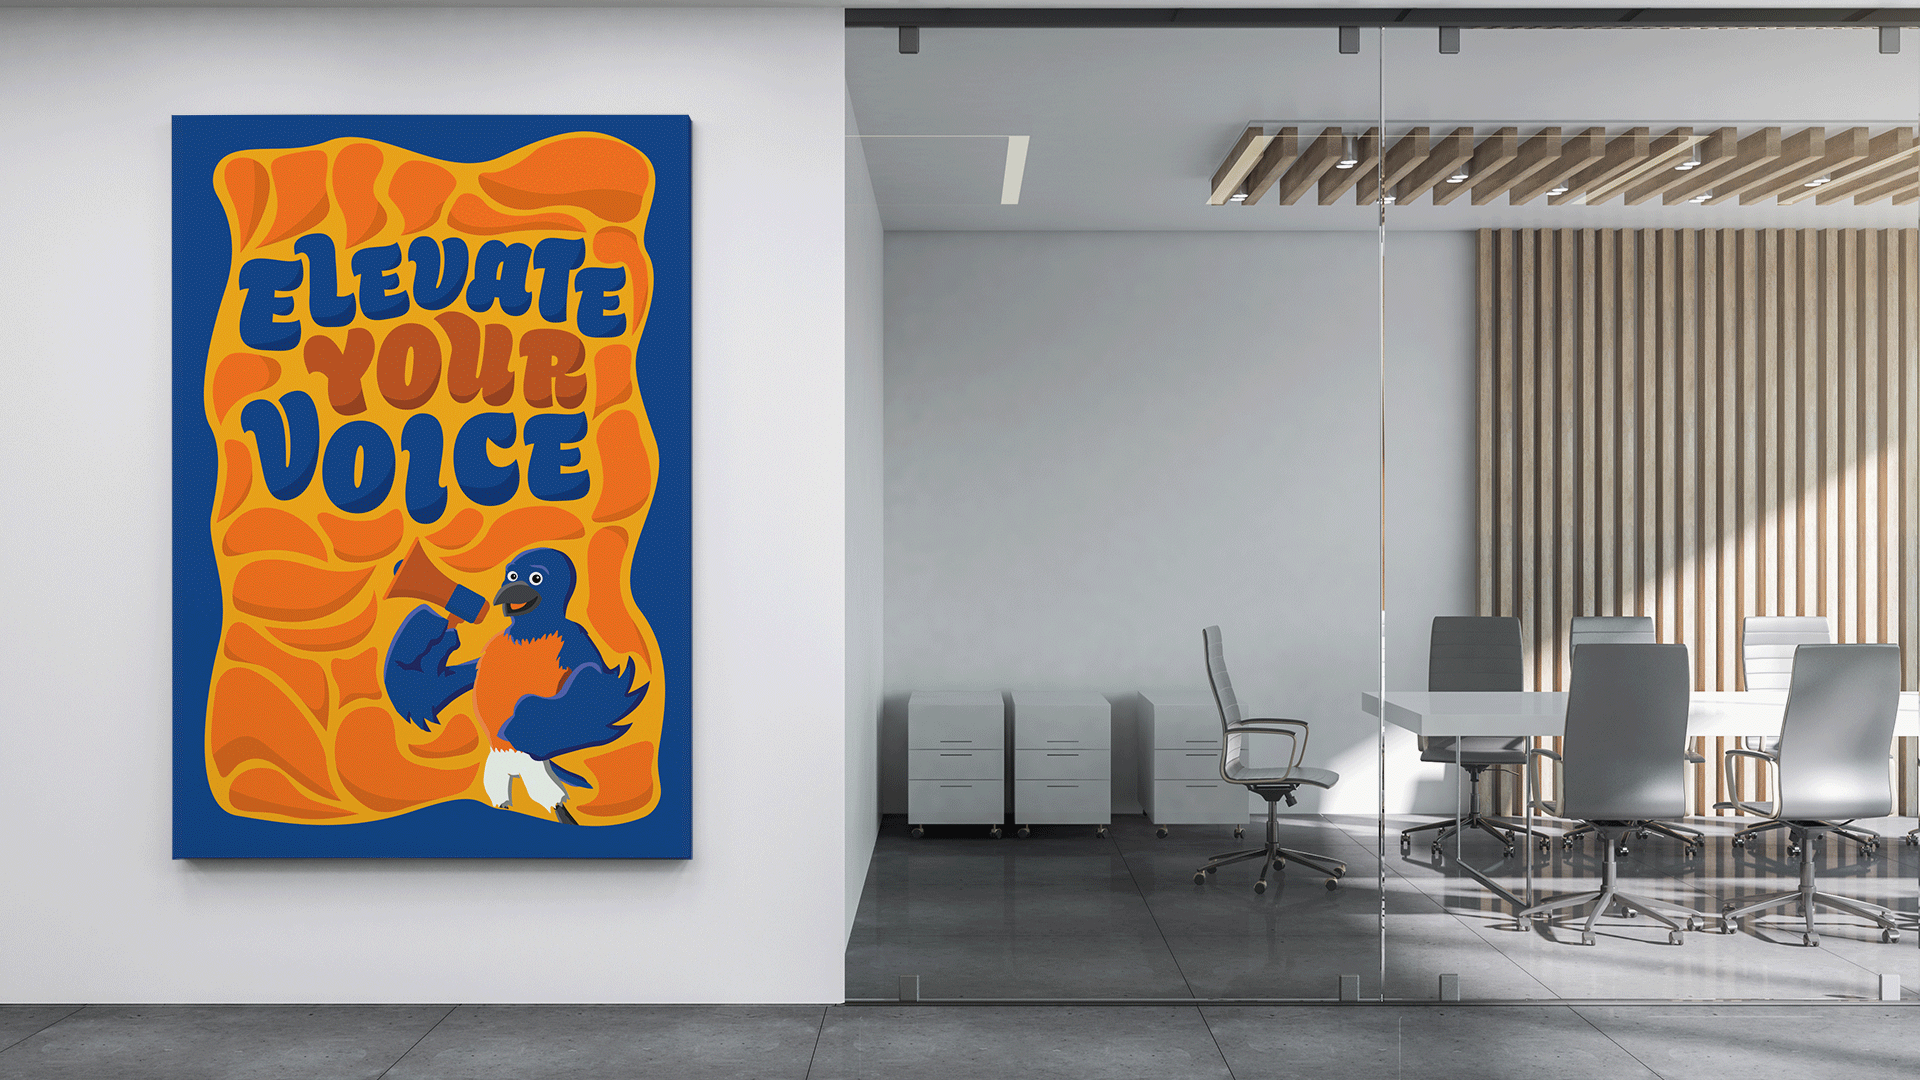 Teams background of a conference room with an illustrated poster of Blue saying 